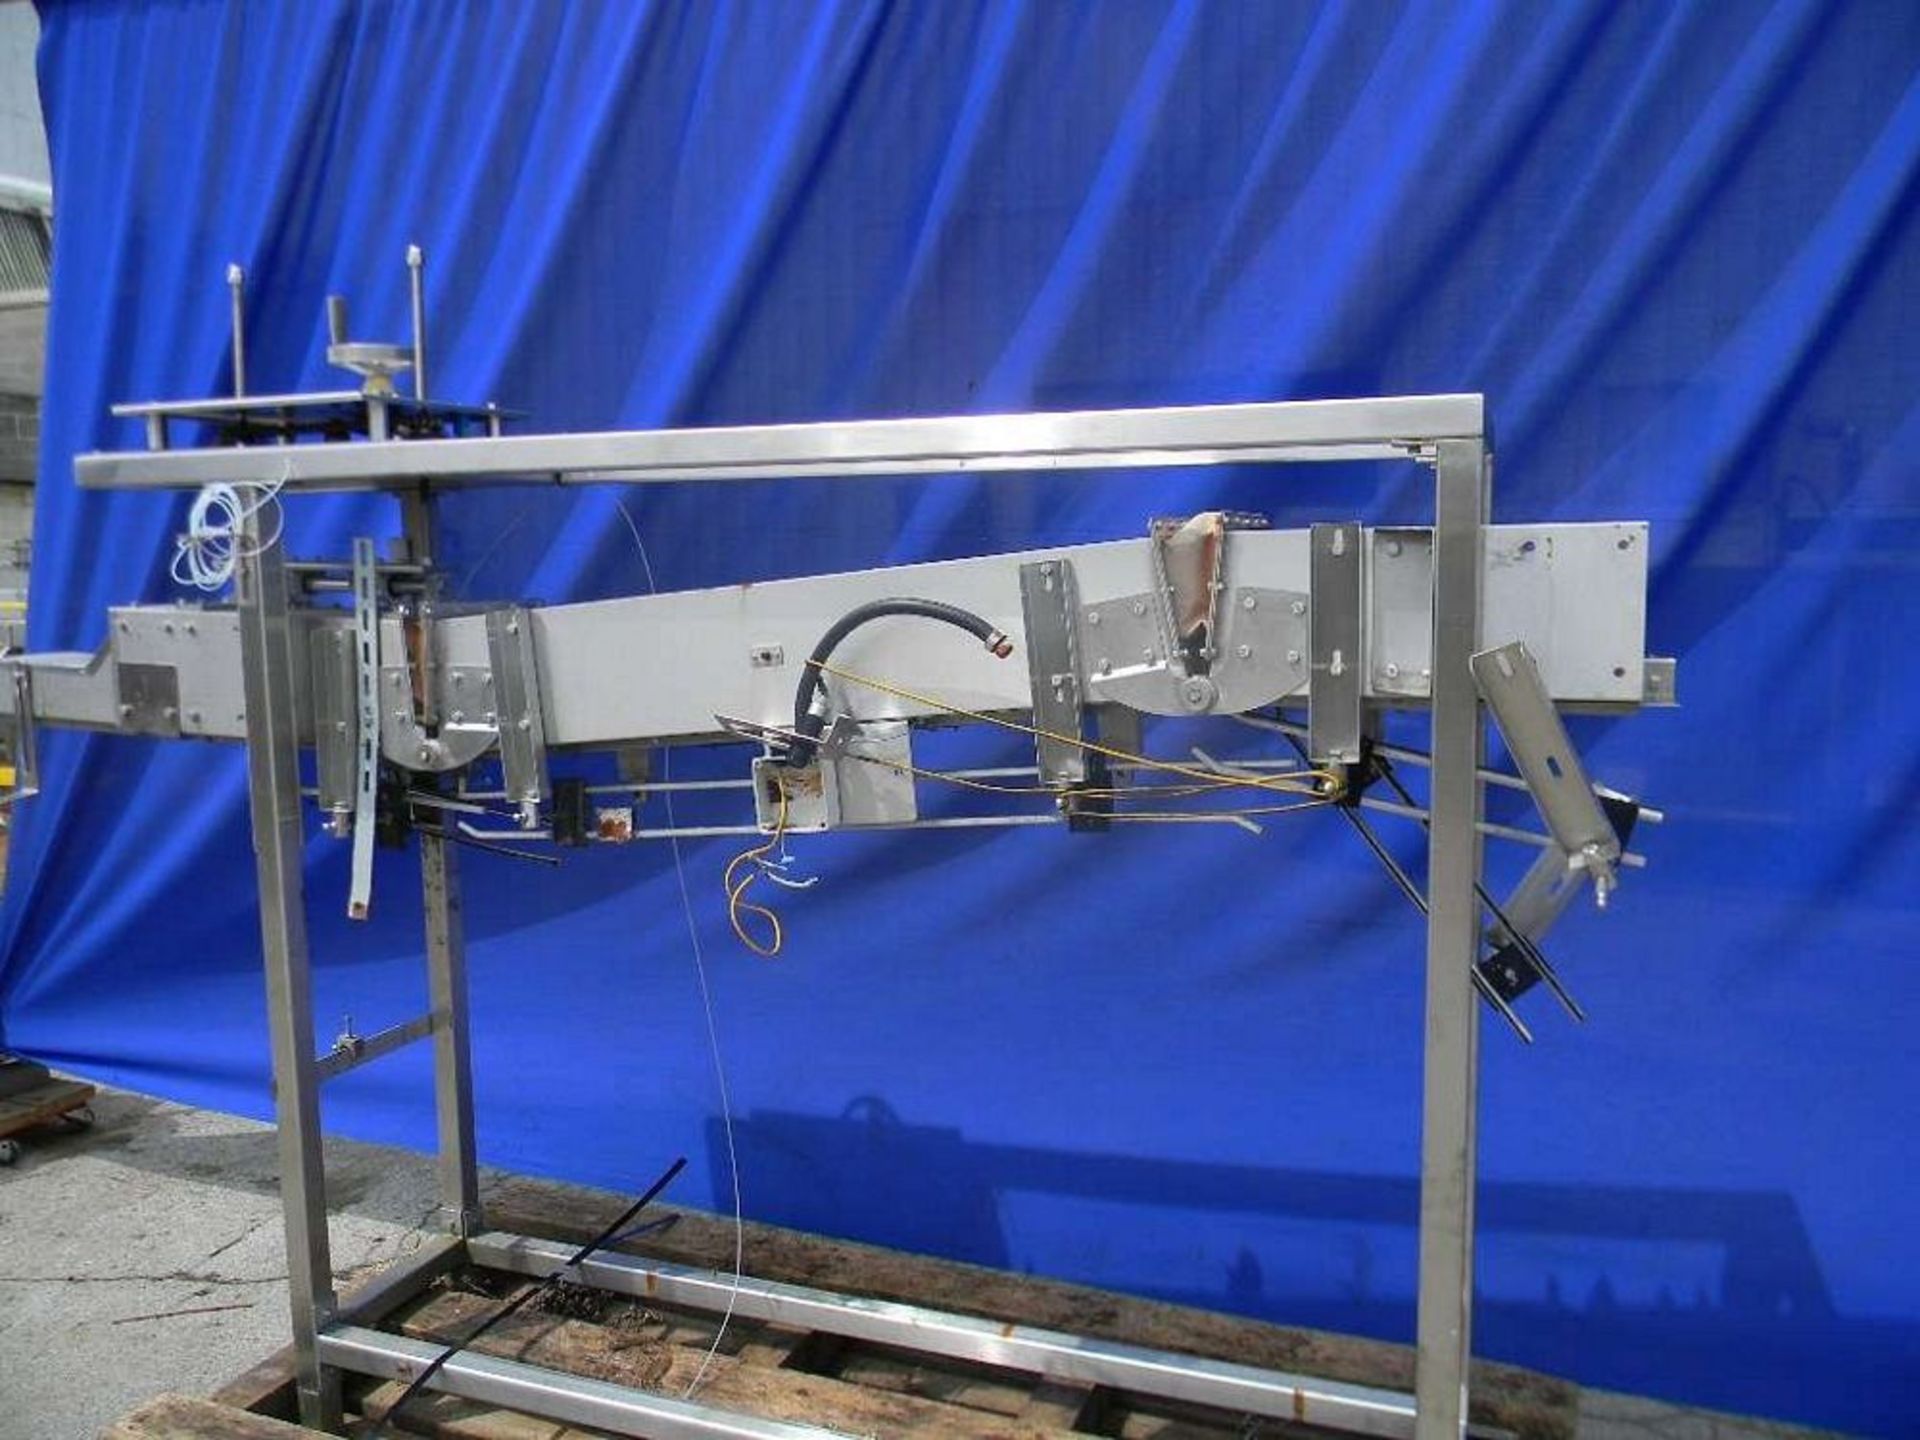 Qty (1) Ling Air Conveyor Pickup Module - All Stainless Steel Construction - Adjustable Infeed - Image 2 of 5